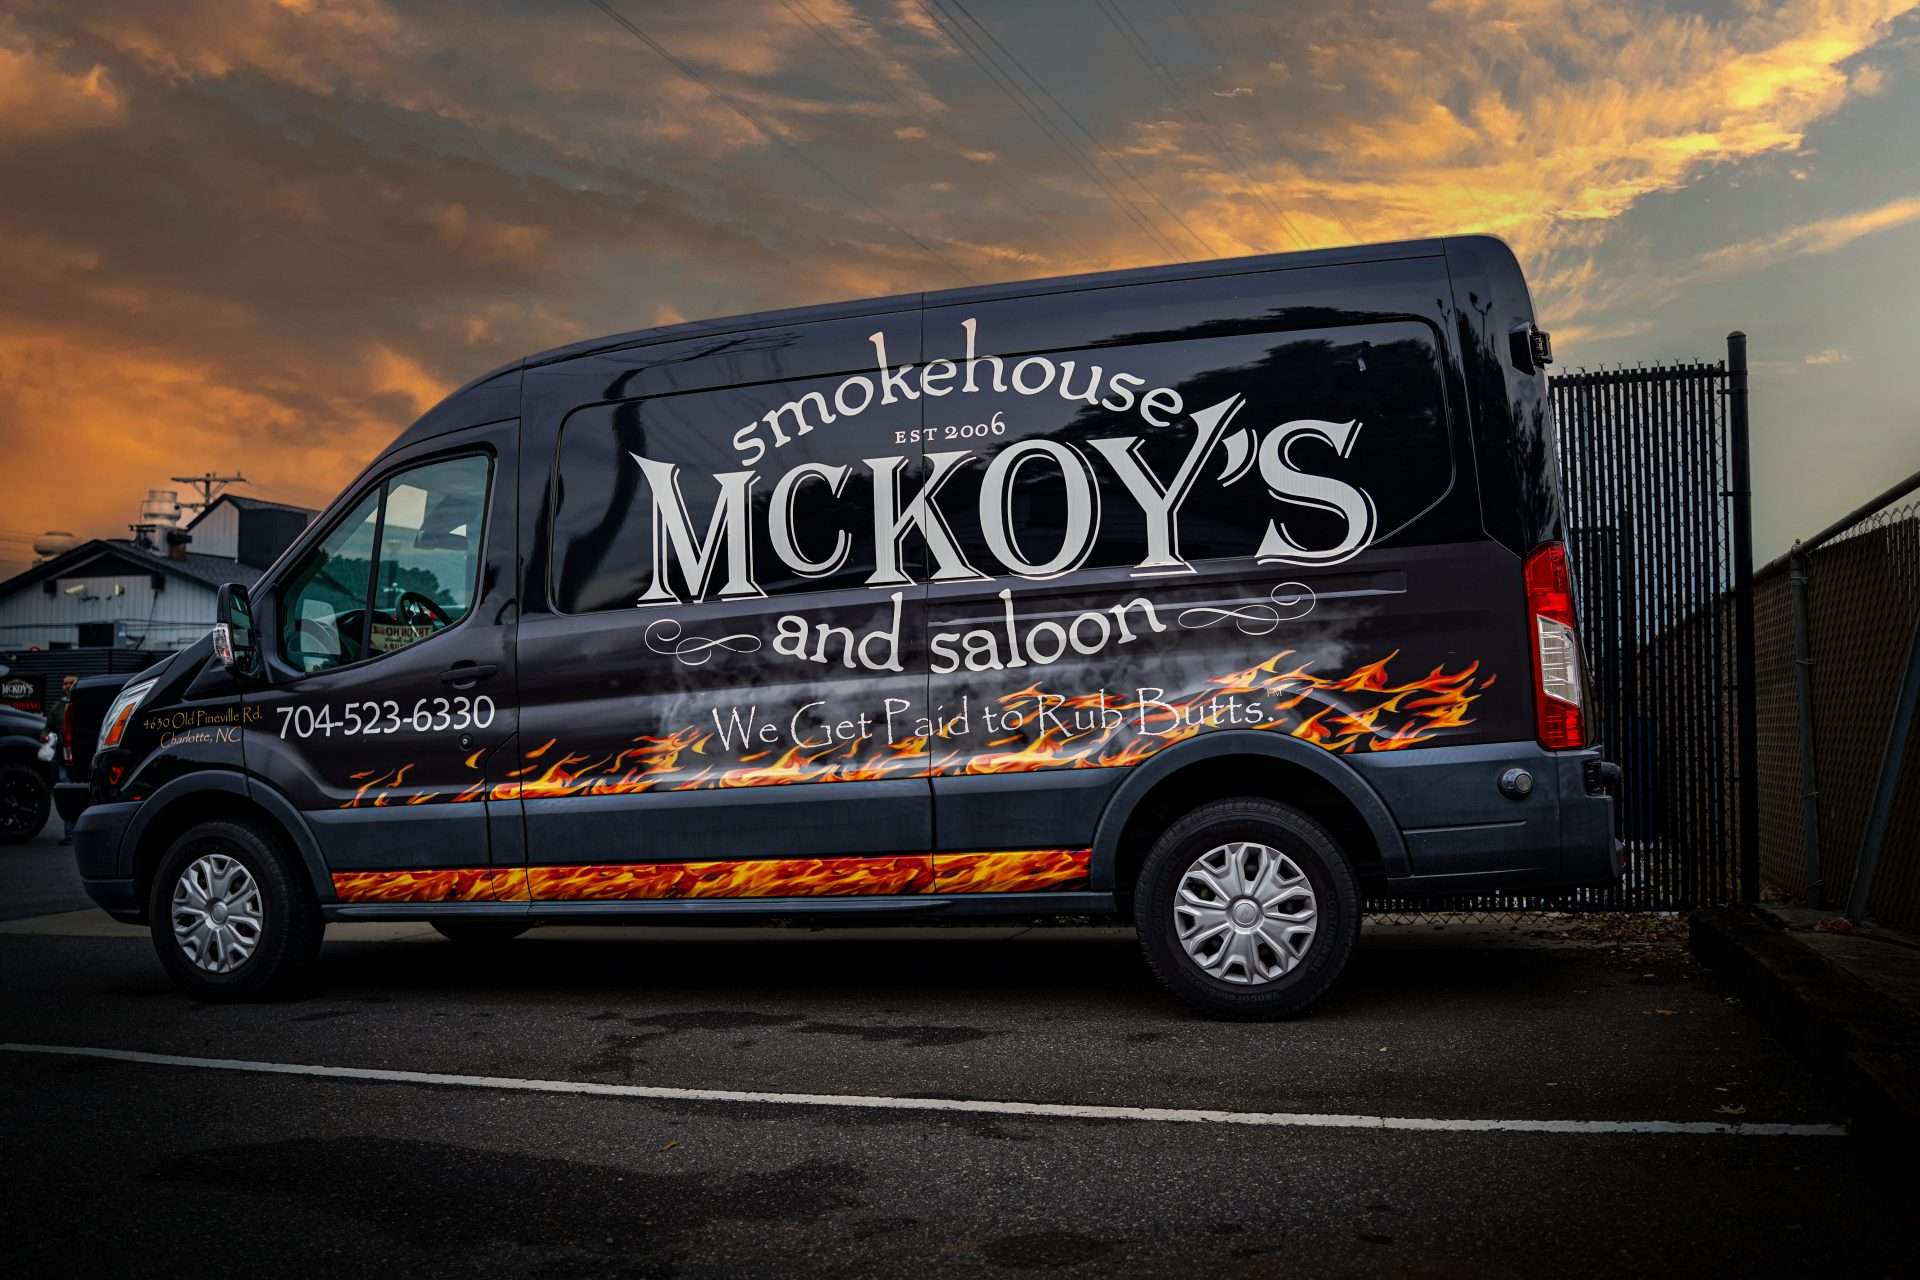 A truck for McKoy's Smokehouse and Saloon.